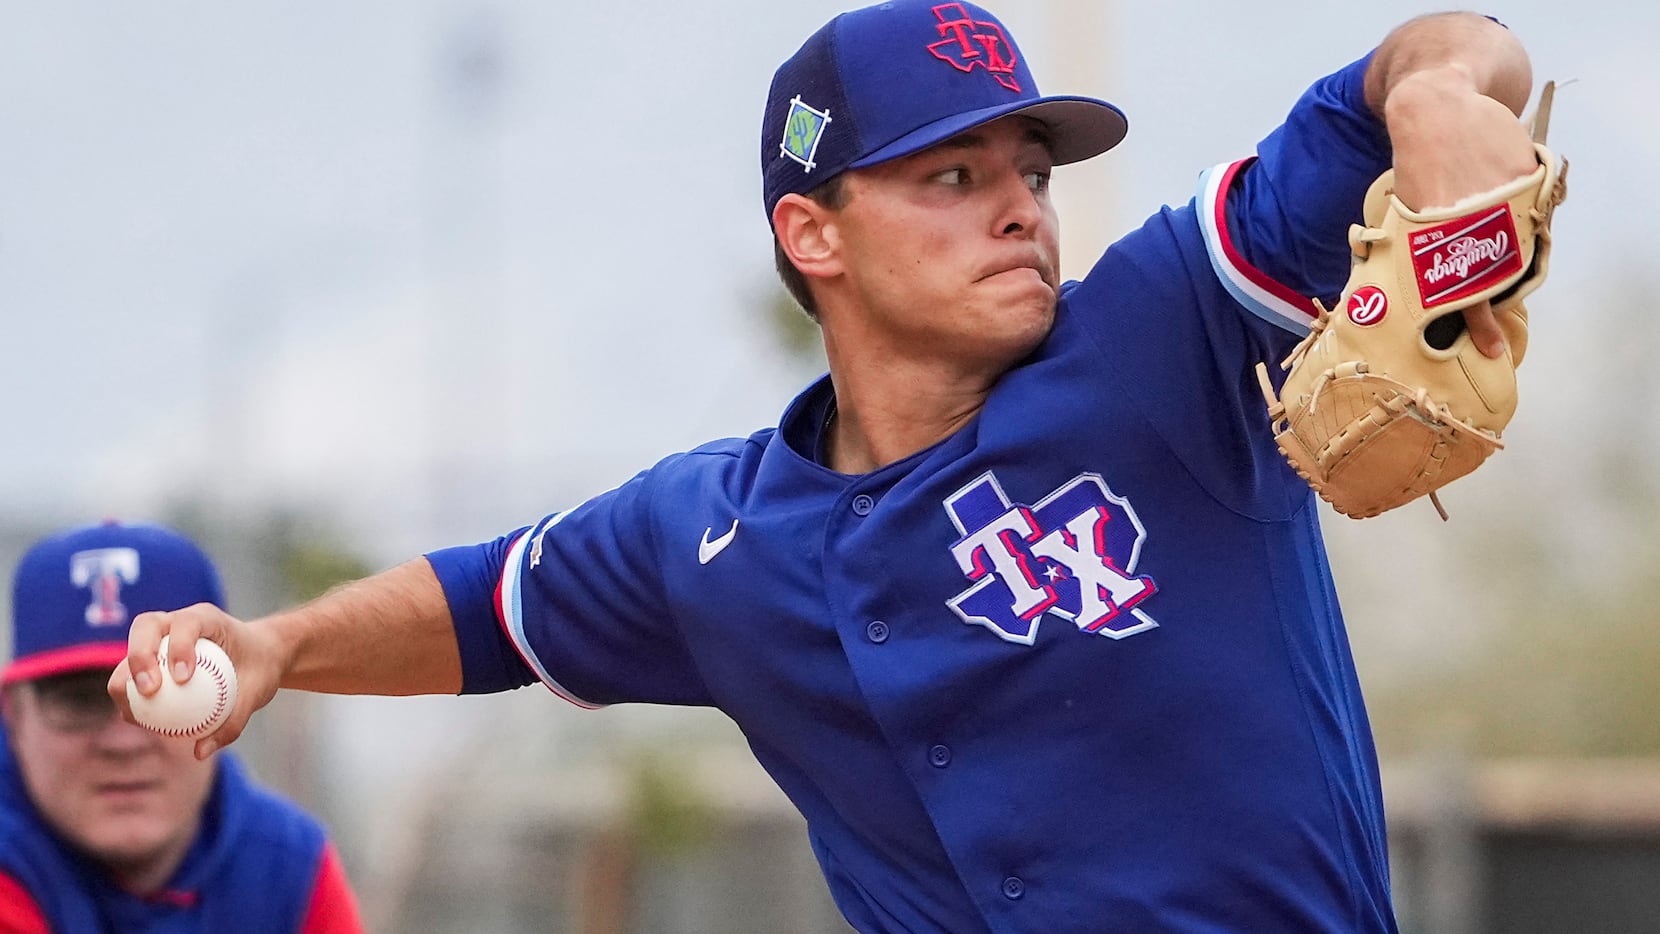 Future Rangers hurler Jack Leiter is now a pro pitcher — maybe